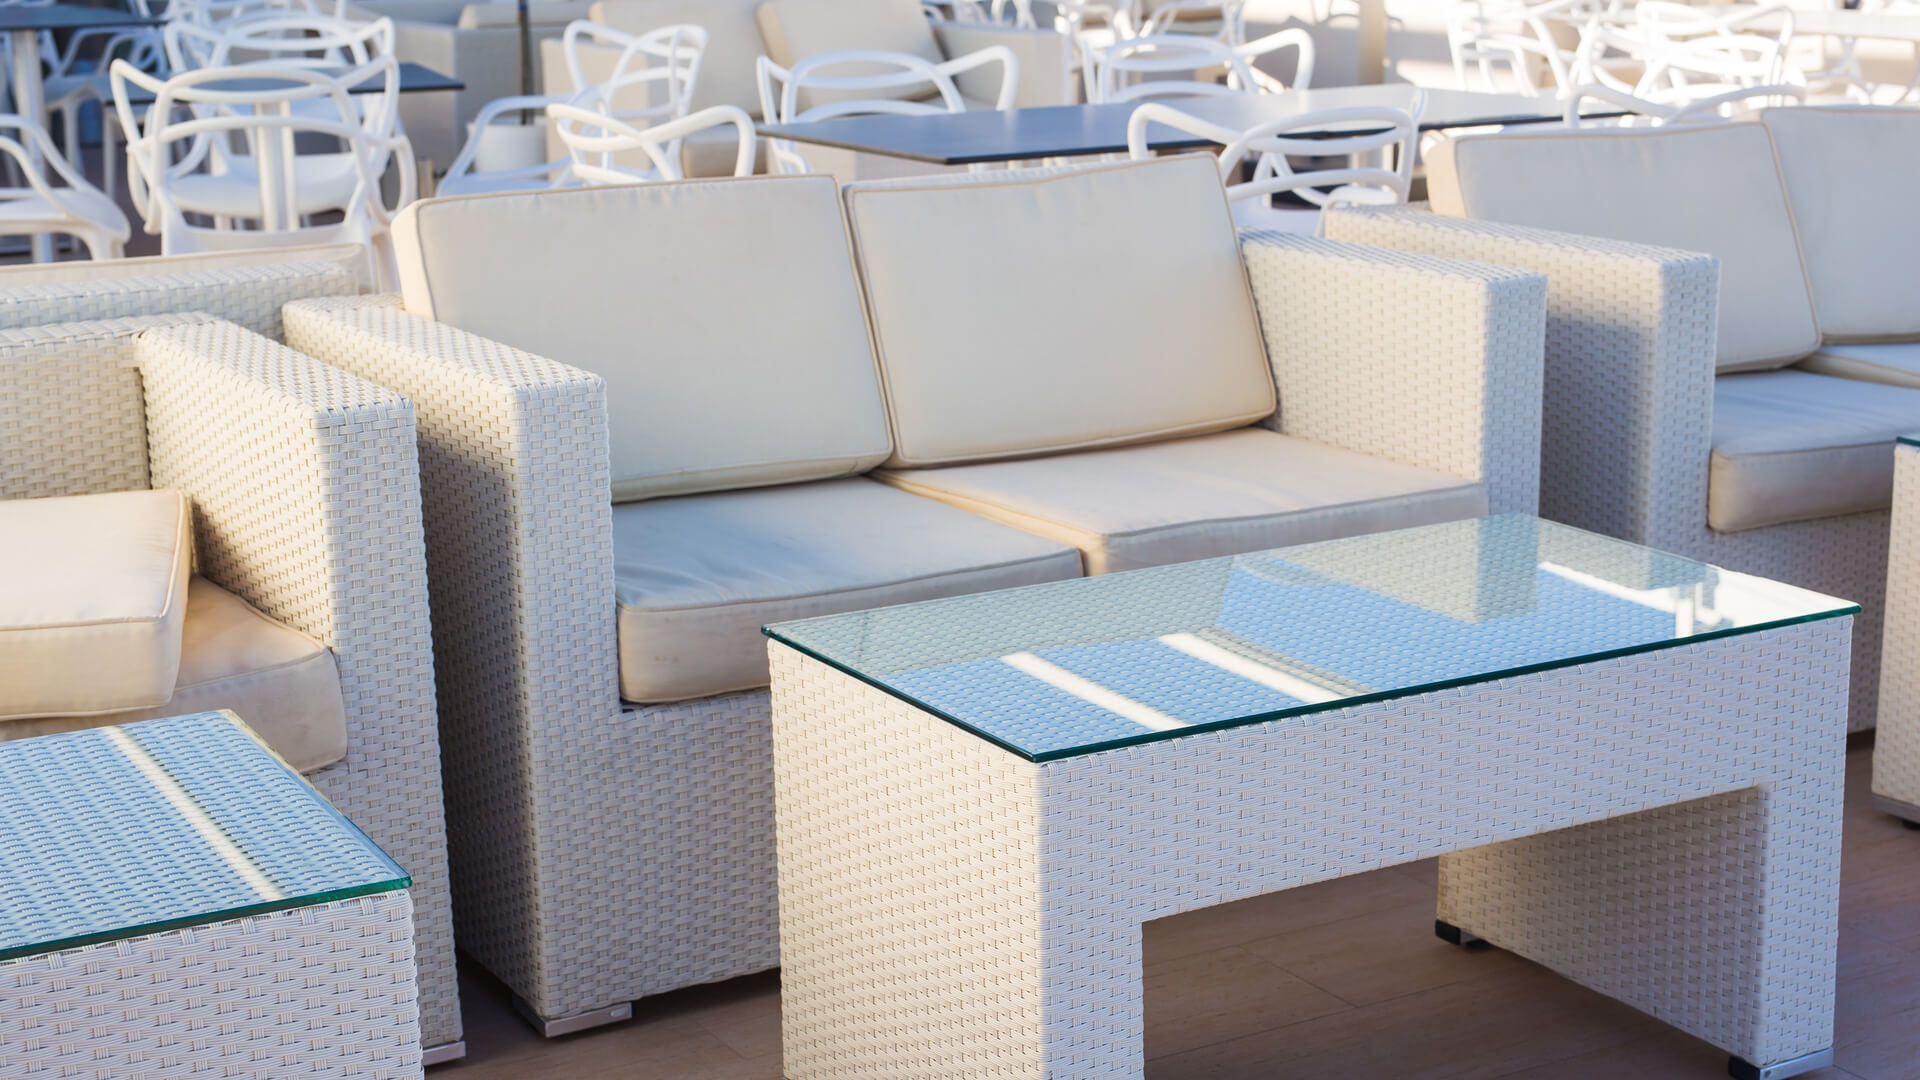 Wicker Outdoor Furniture by PHP of Las Vegas